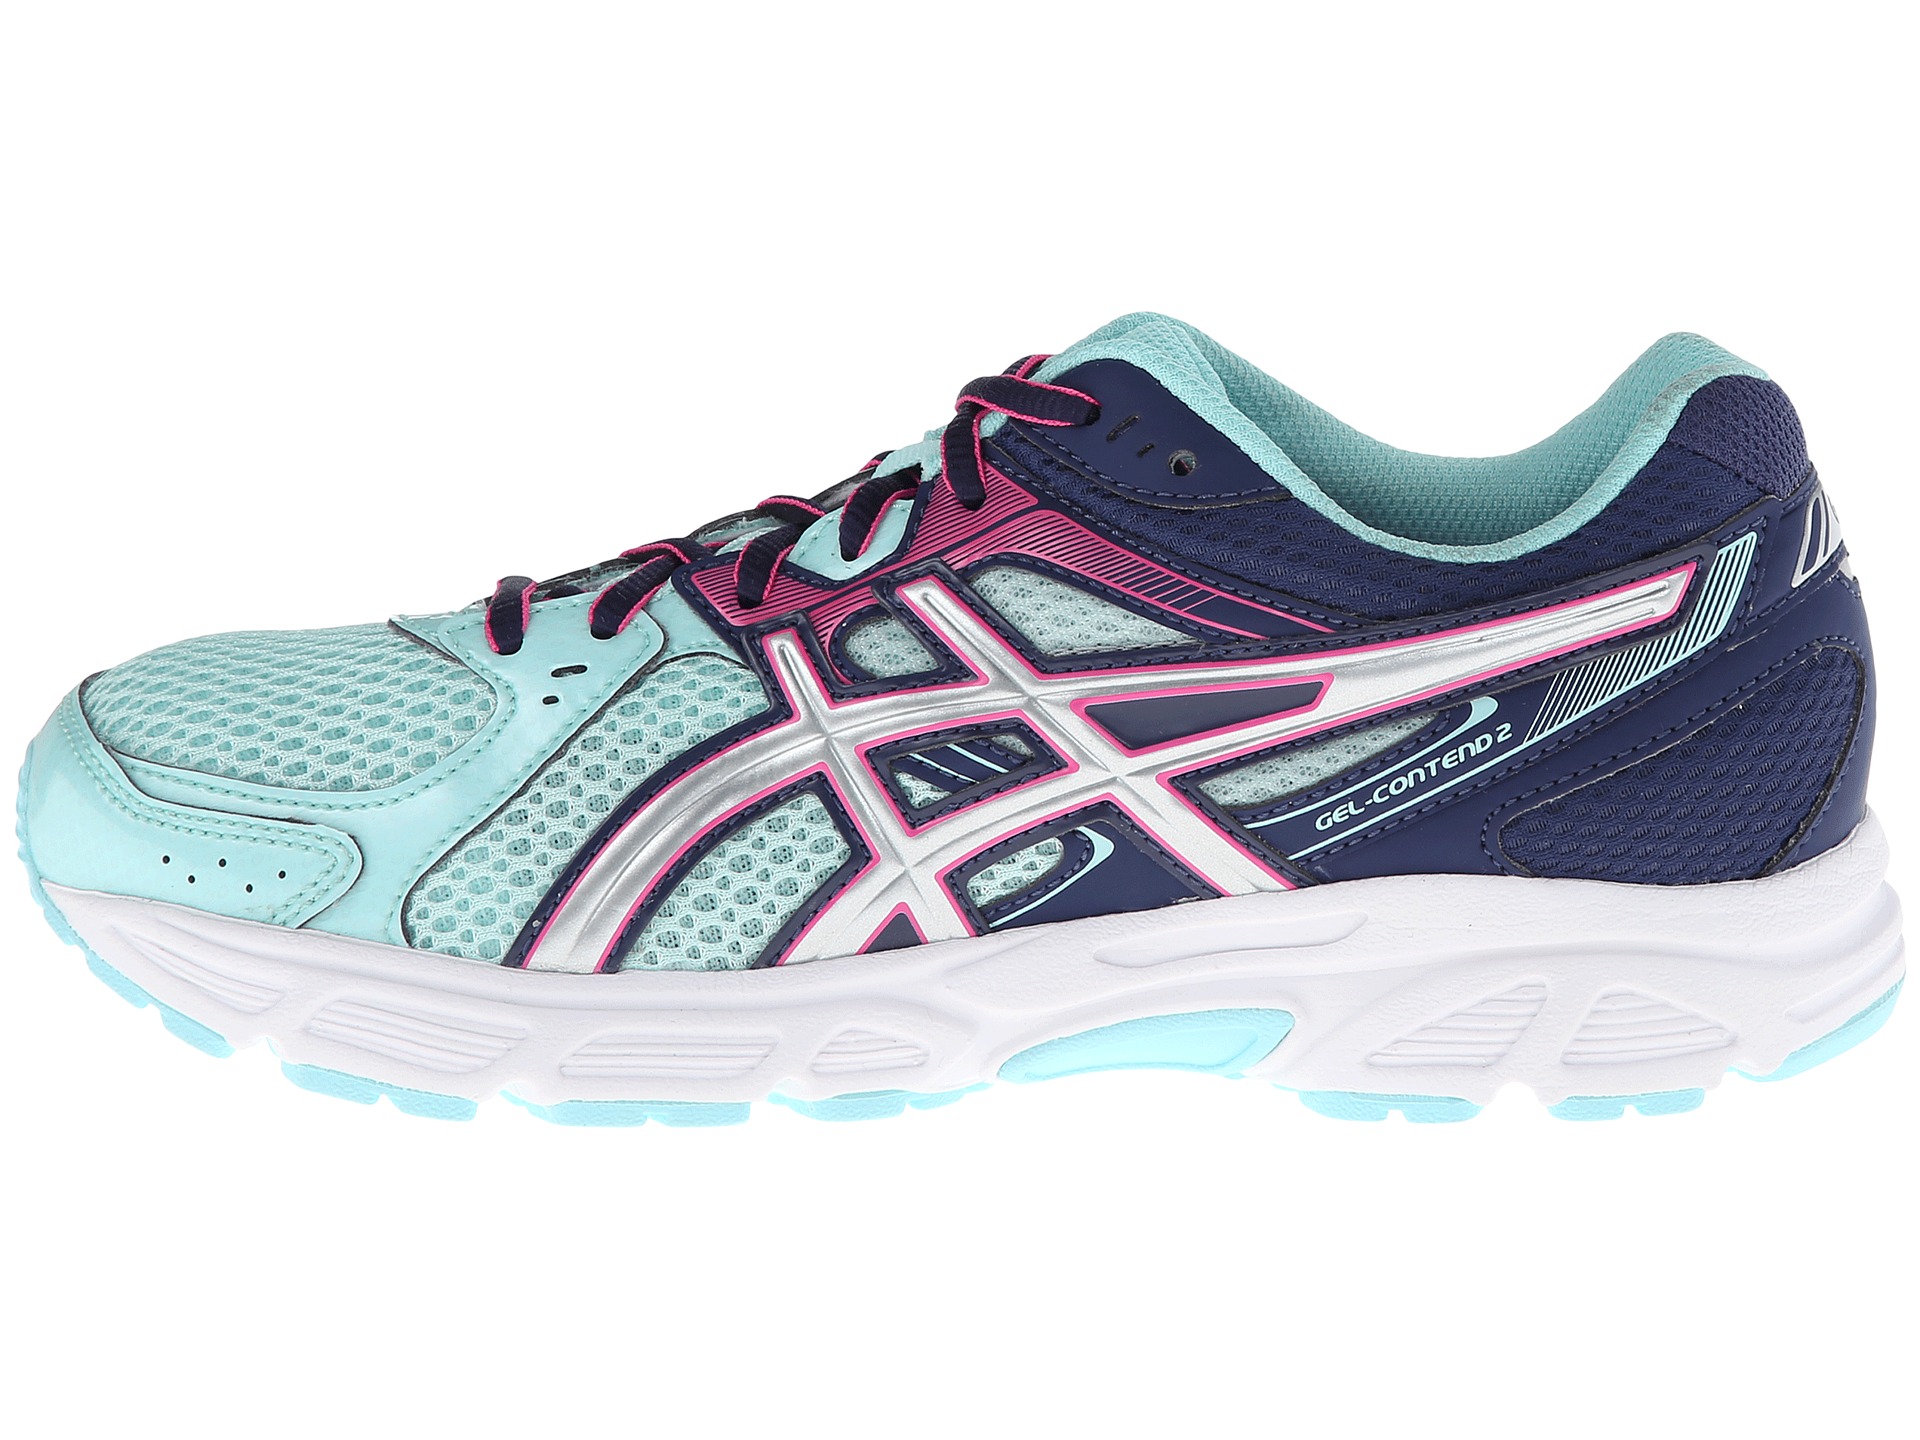 ASICS GEL-Contend™ 2 Ice Blue/Silver/Pink - Zappos.com Free Shipping ...